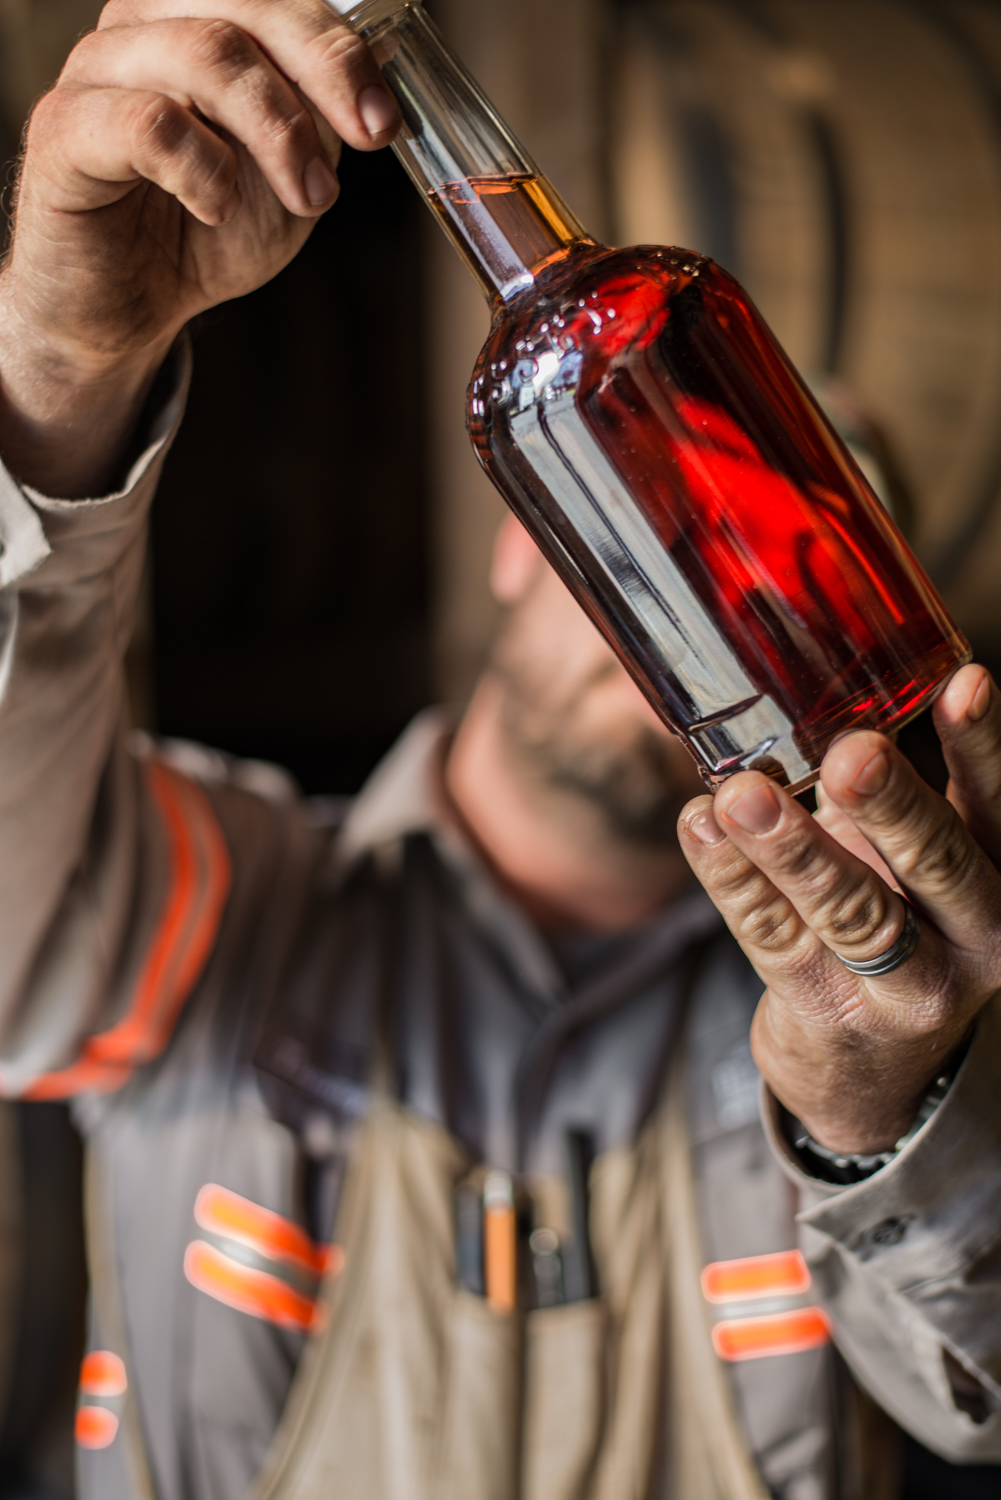 A distillery worker holding bottle of sampled whiskey at George Dickel Distillery, showing grit, hard work, craftsmanship. Photo by Nashville and Chicago editorial, industrial, beverage, and product photographer Kristina Krug. 